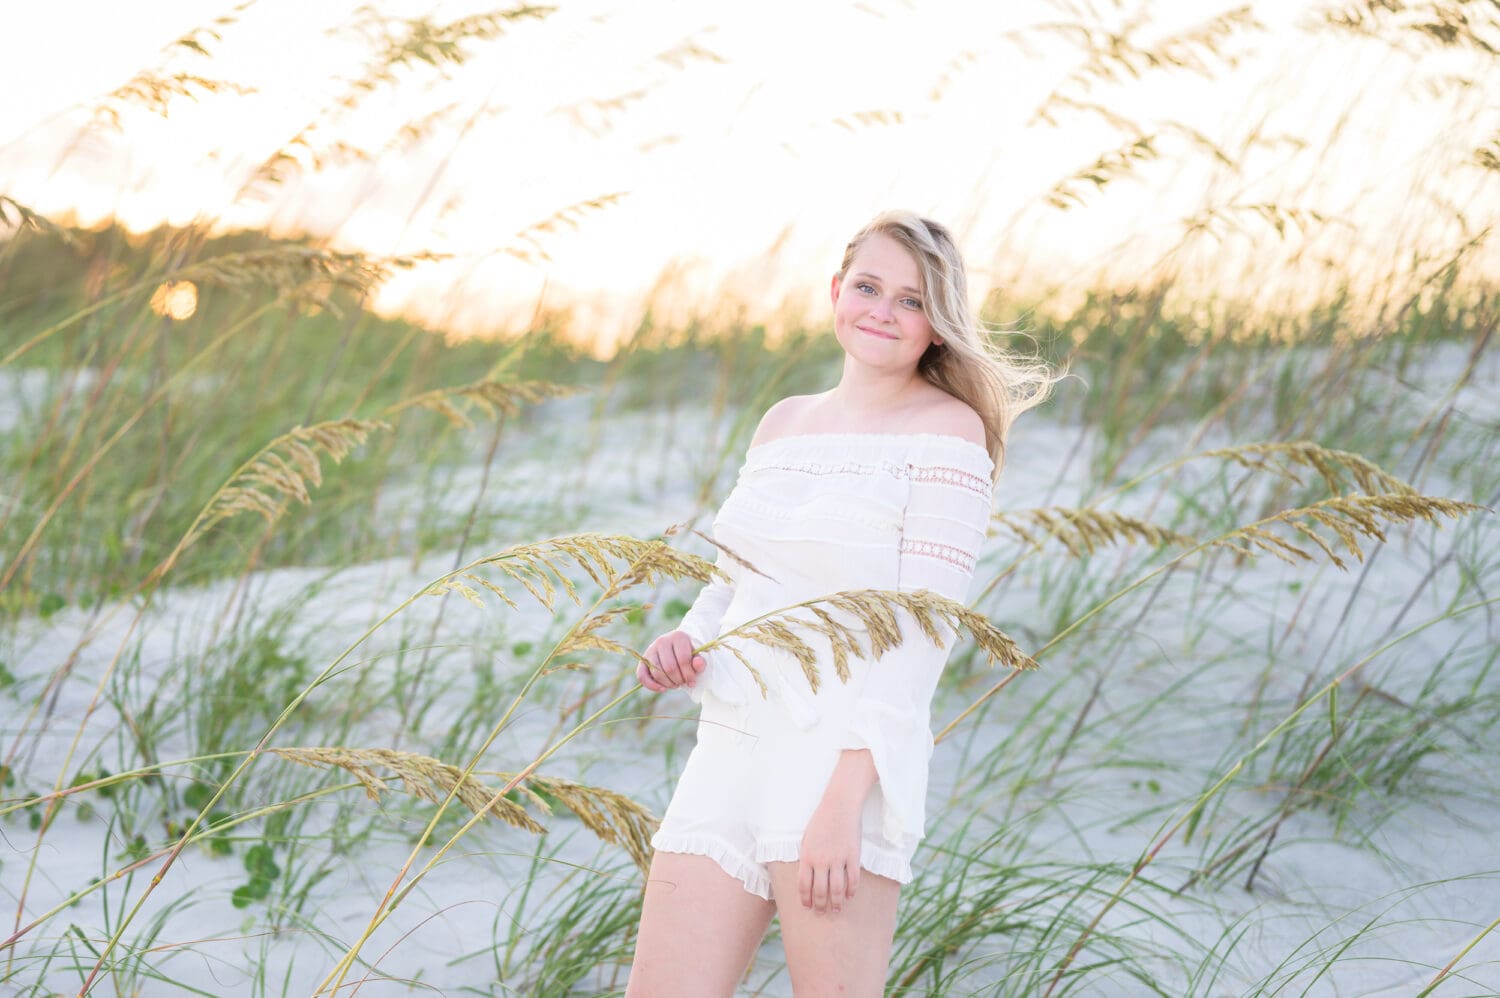 Senior girl standing in the seaoats  - Huntington Beach State Park